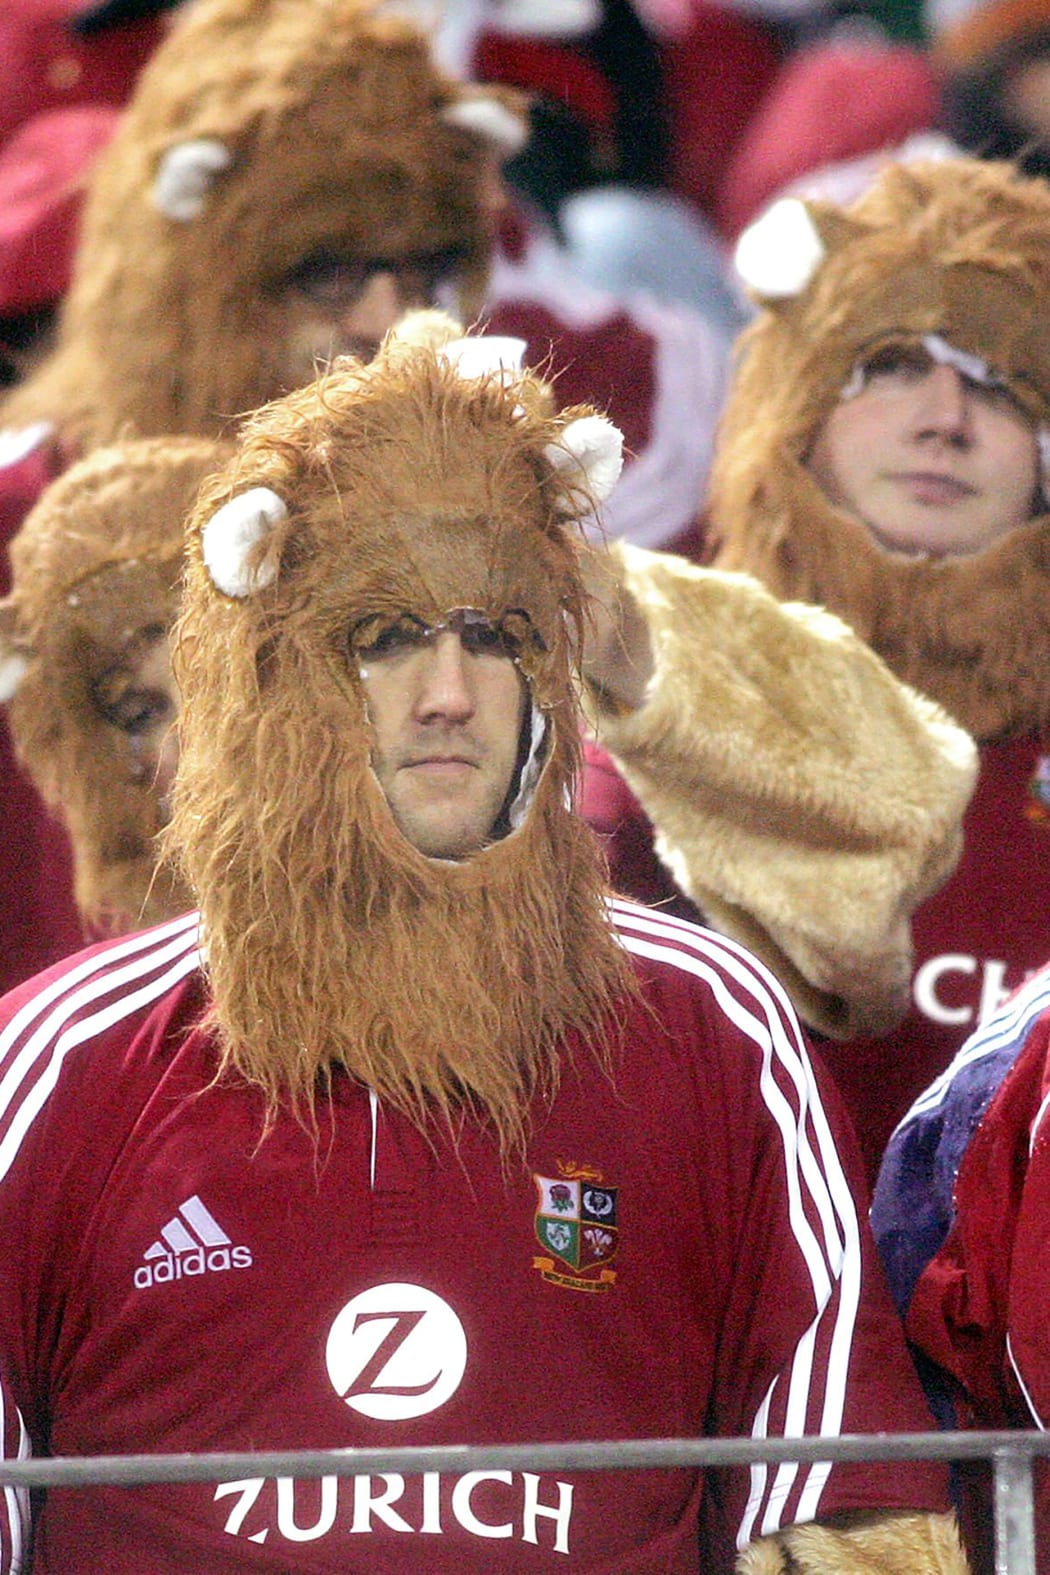 British and Irish Lions fans after their team was defeated by the New Zealand All Blacks in the first Test match in Christchurch in the Lions tour 2005.